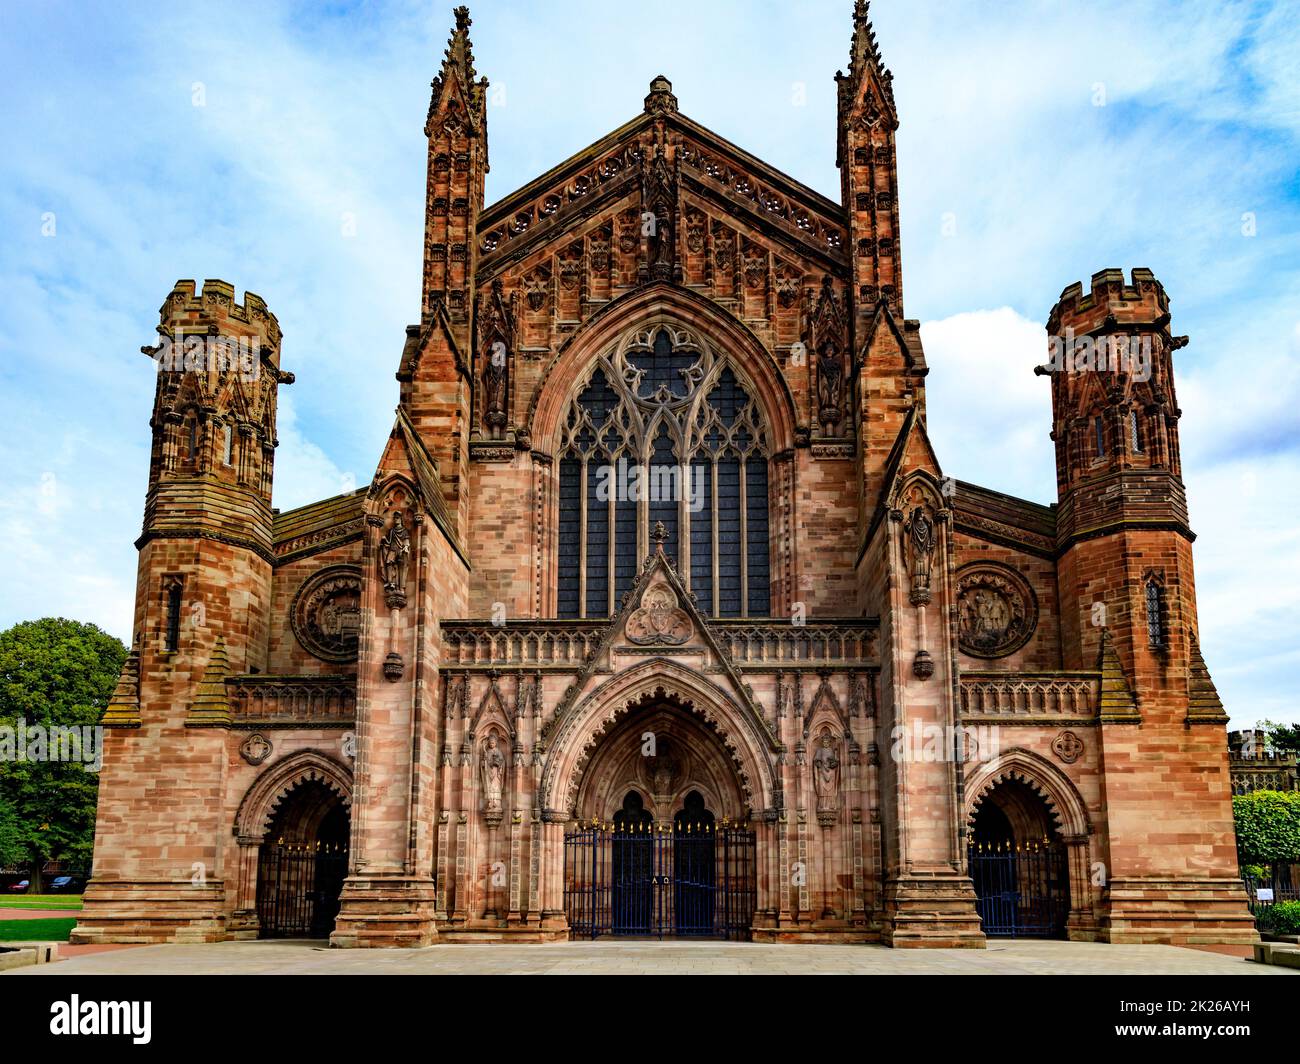 West front of the Gothic Cathedral of St Mary the Virgin and St Ethelbert the King in Hereford, Herefordshire, England, UK Stock Photo